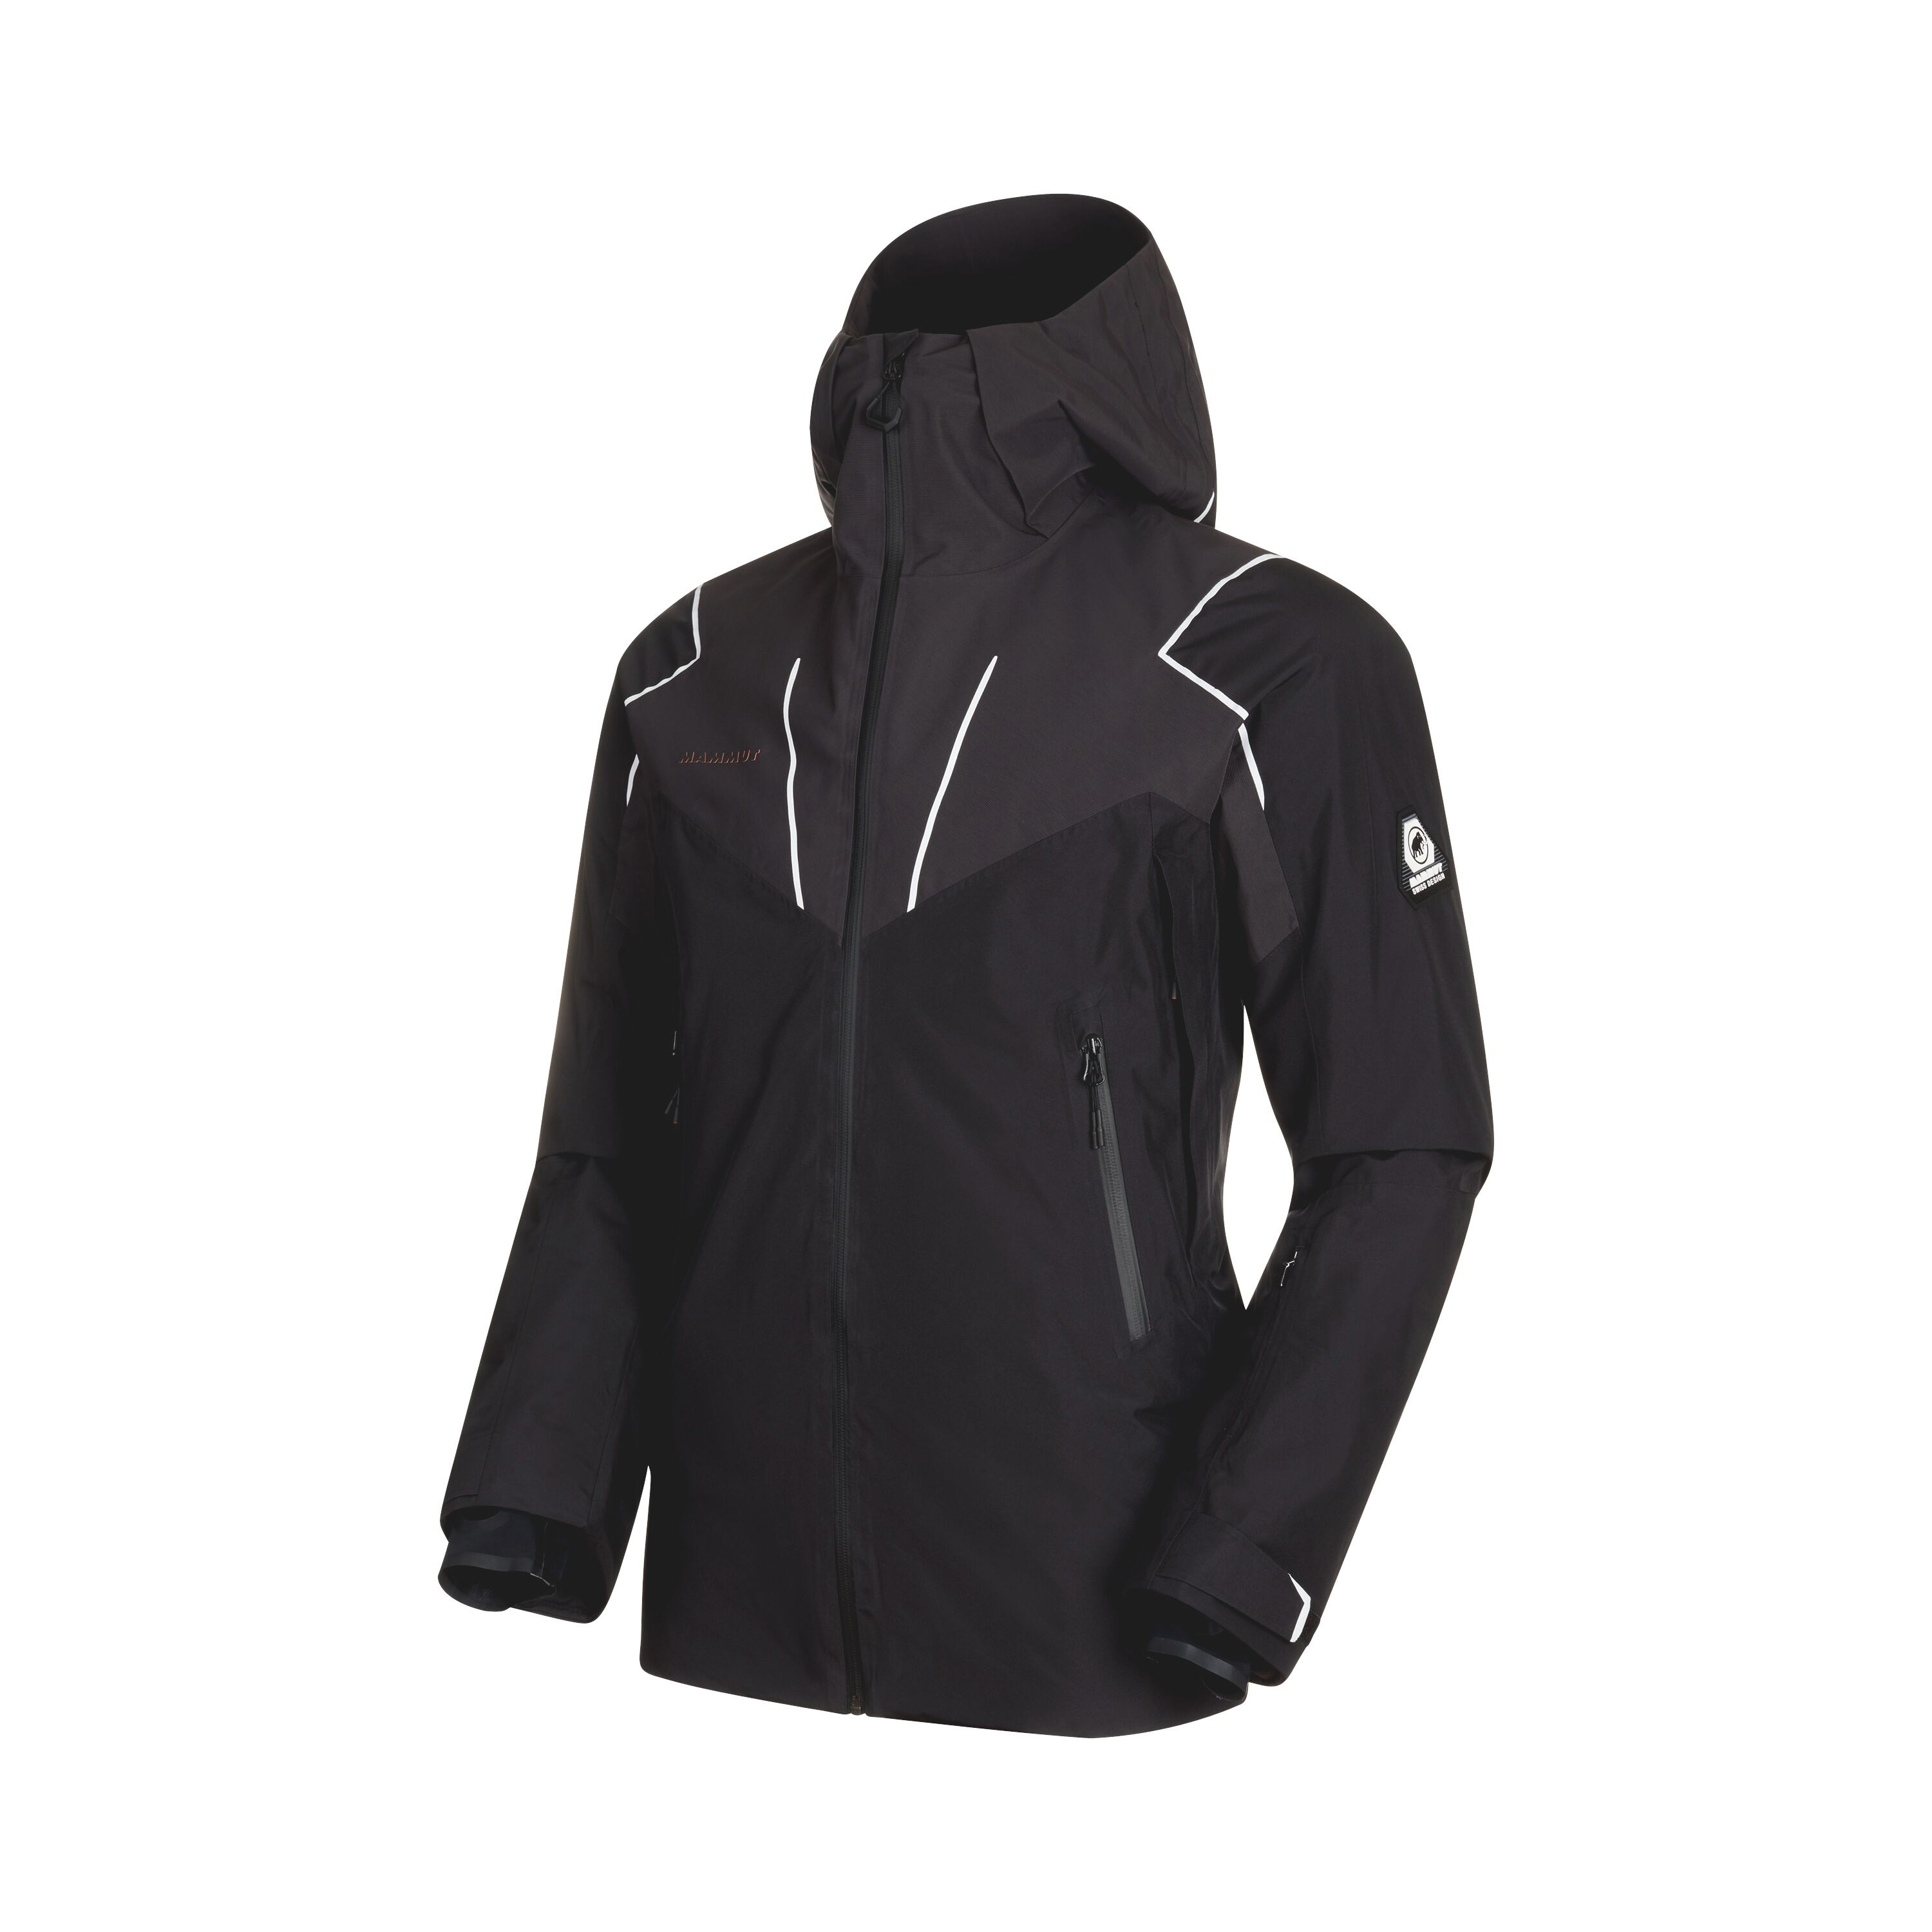 Mammut Scalottas HS Thermo Hooded Jacket - Giacca da sci - Uomo